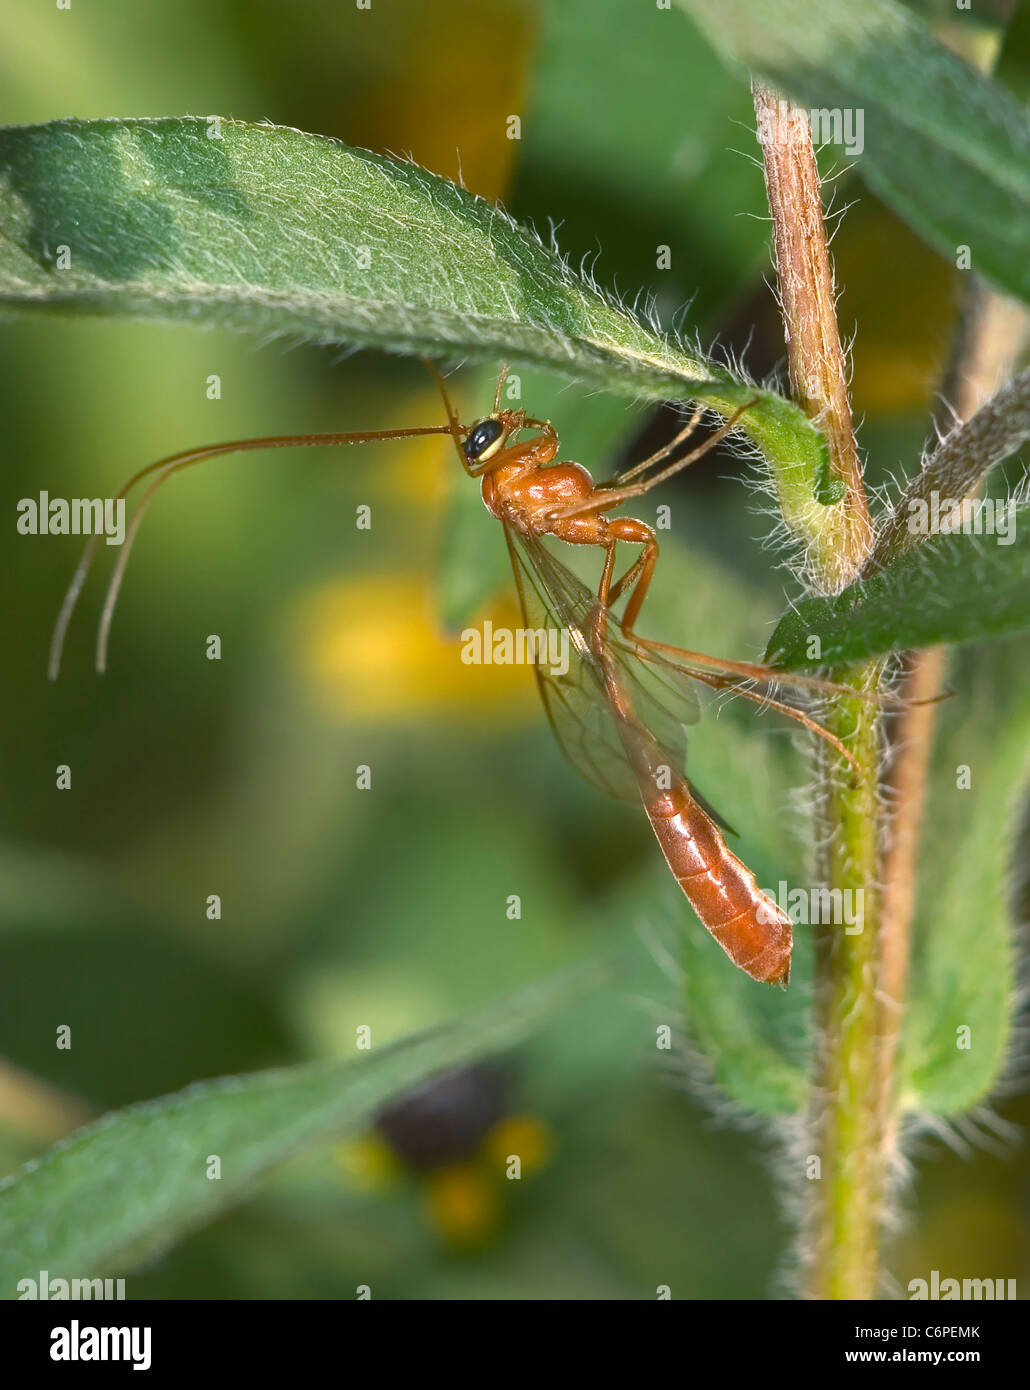 A Fascinating Looking Creature, An Orange Thread Waisted Wasp, Short-tailed Ichneumon, Ophion nigrovarius Stock Photo